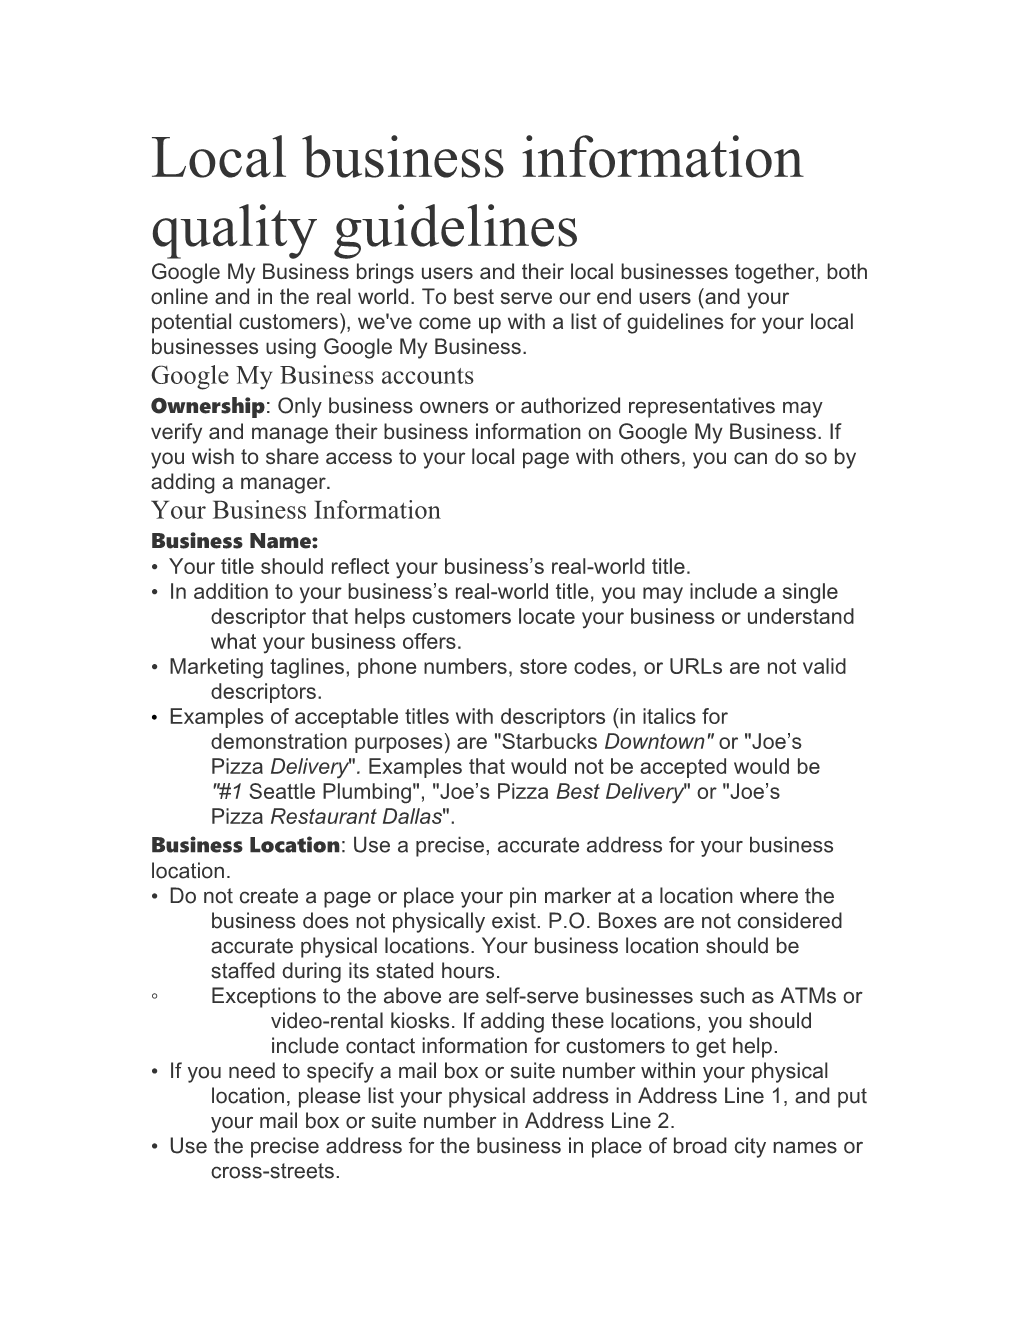 Local Business Information Quality Guidelines